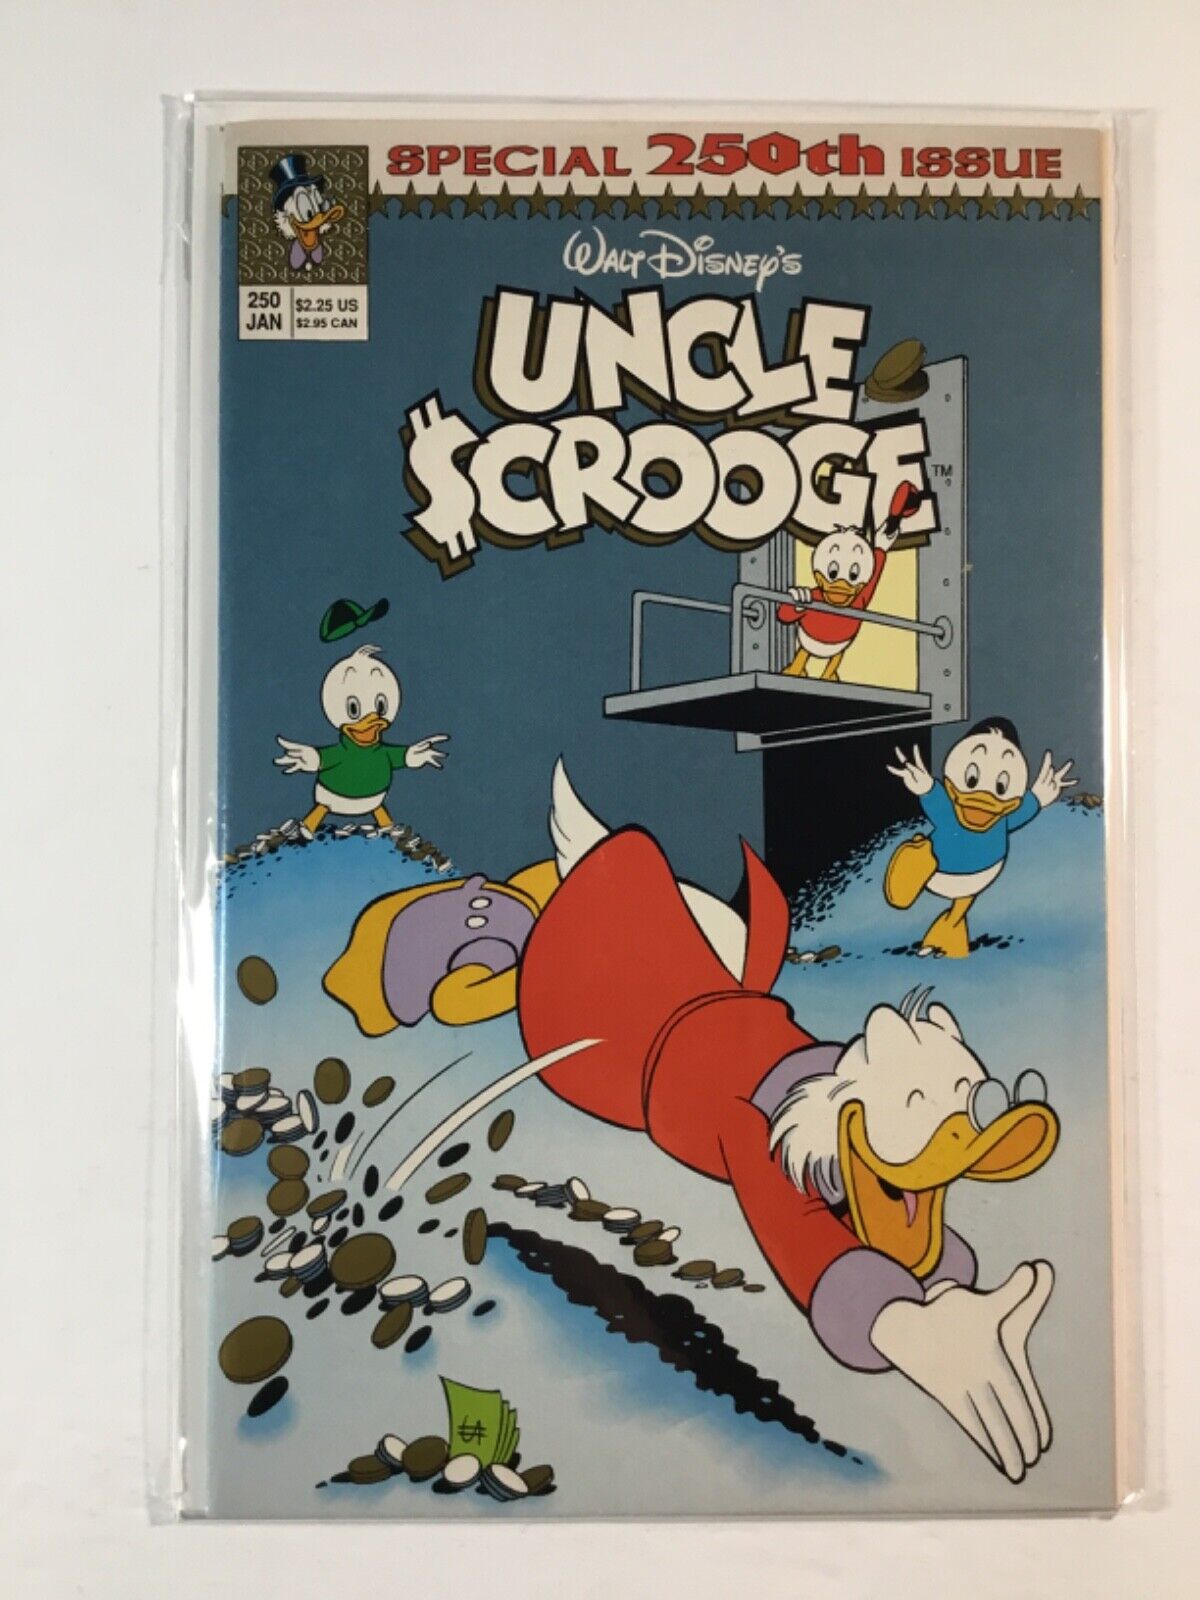 UNCLE SCROOGE #250 VF- 7.5🟢💲🏦💲🟢COVER BY: WILLIAM VAN HORN🟢💲🏦💲🟢C. BARKS